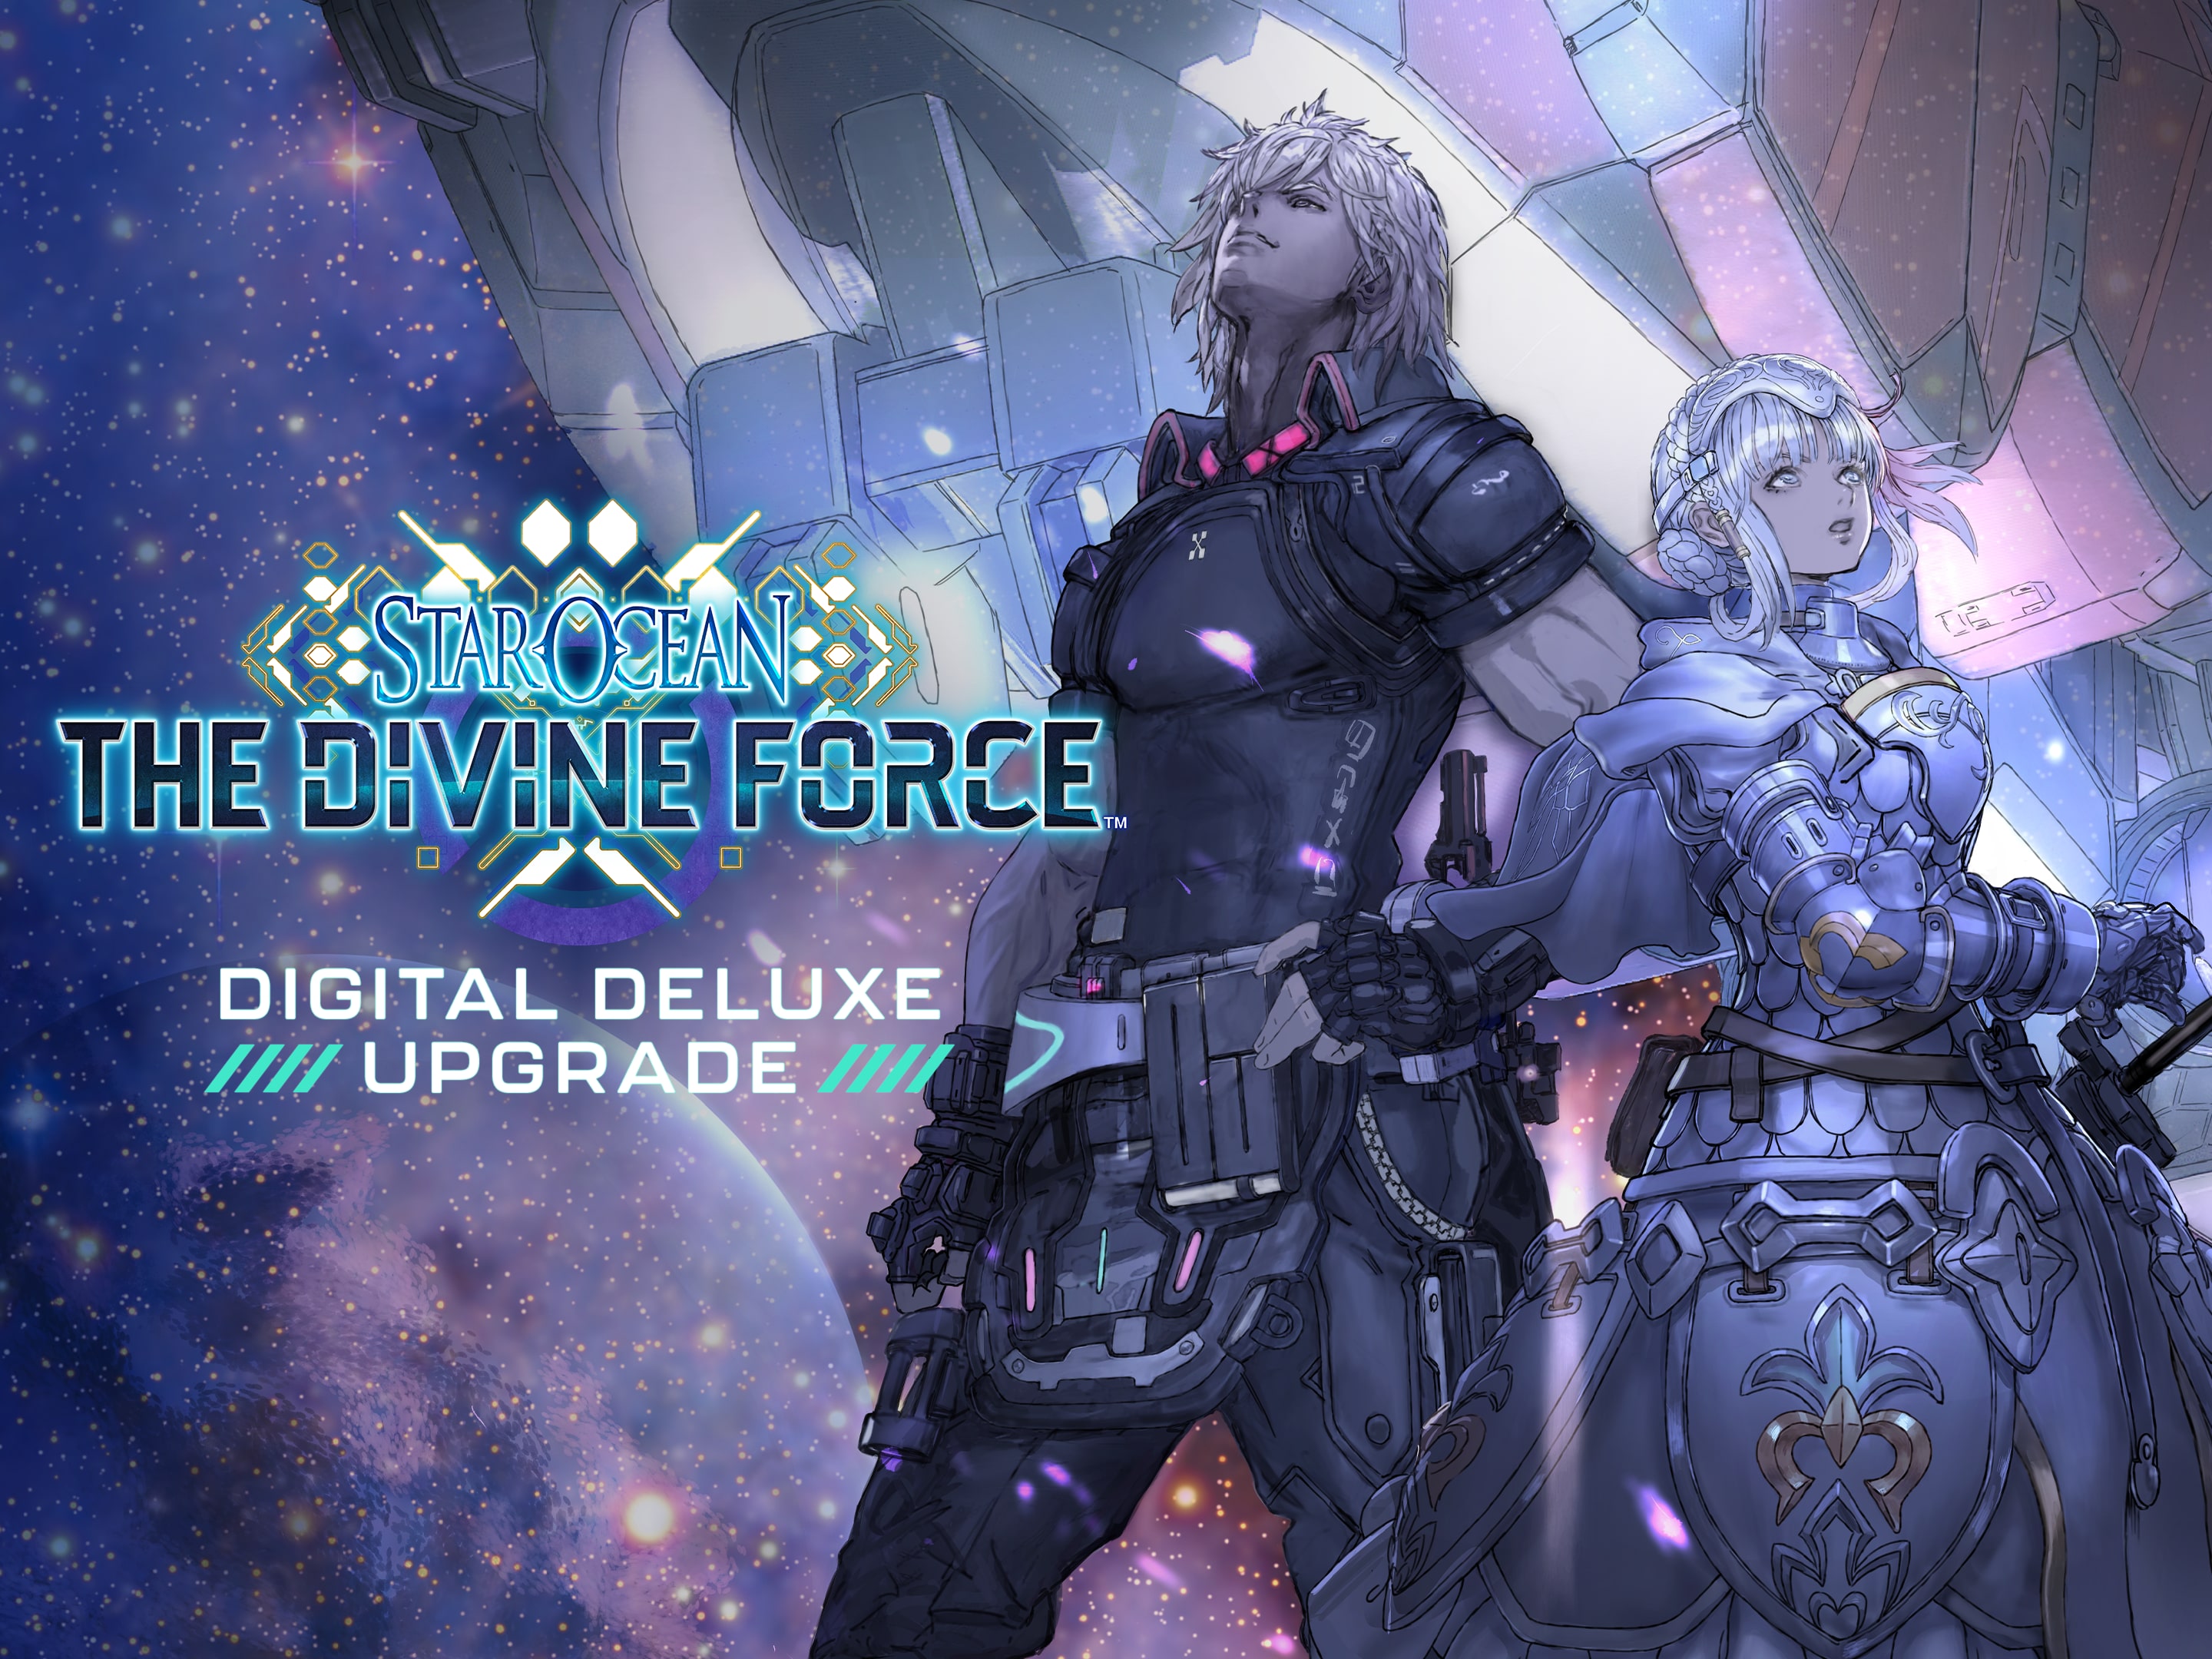 Star Ocean: The Divine Force - PlayStation 4 